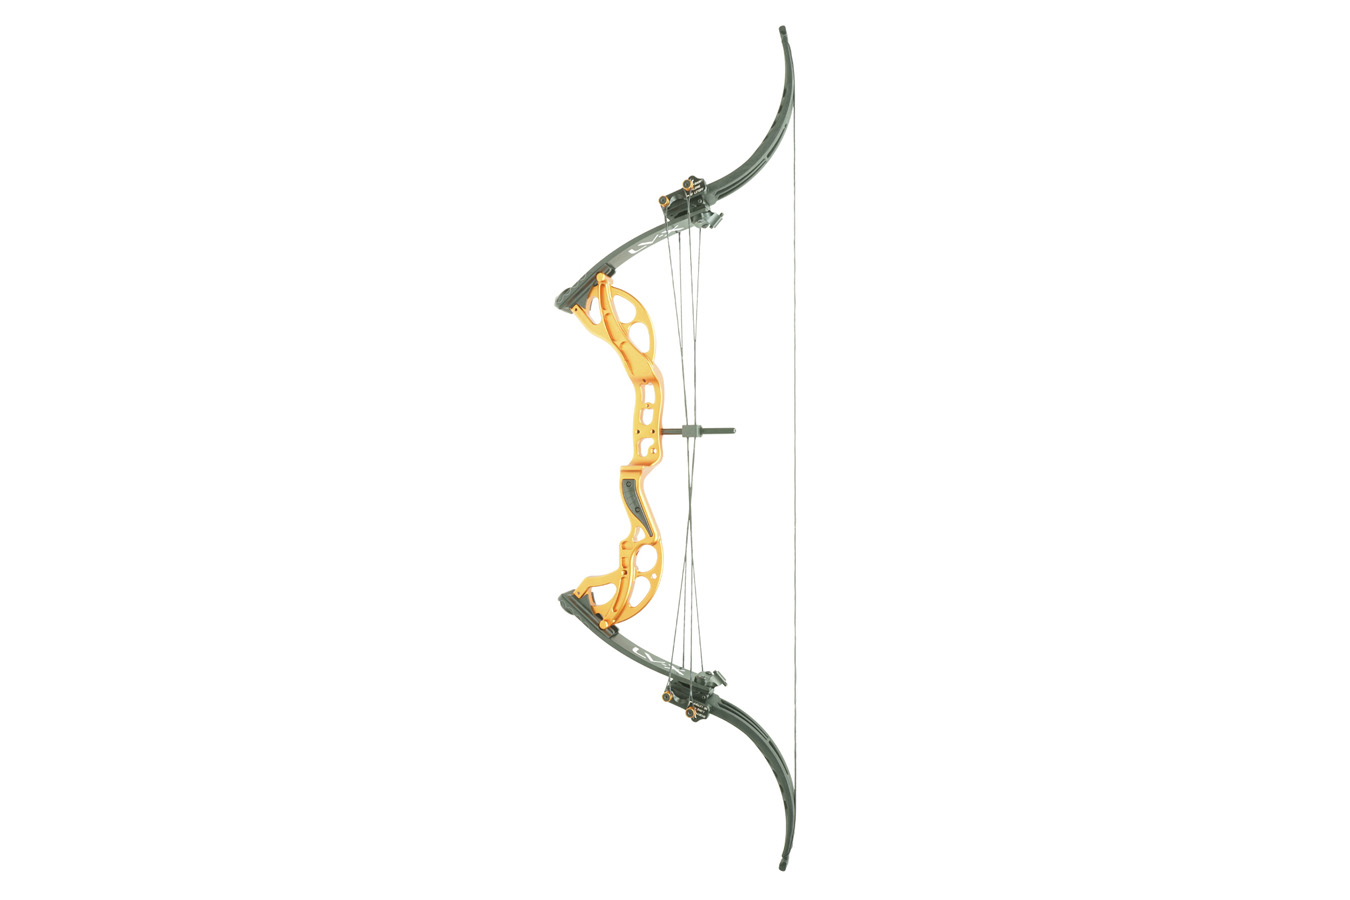 Gear Review: Muzzy Bowfishing Addict - Petersen's Bowhunting